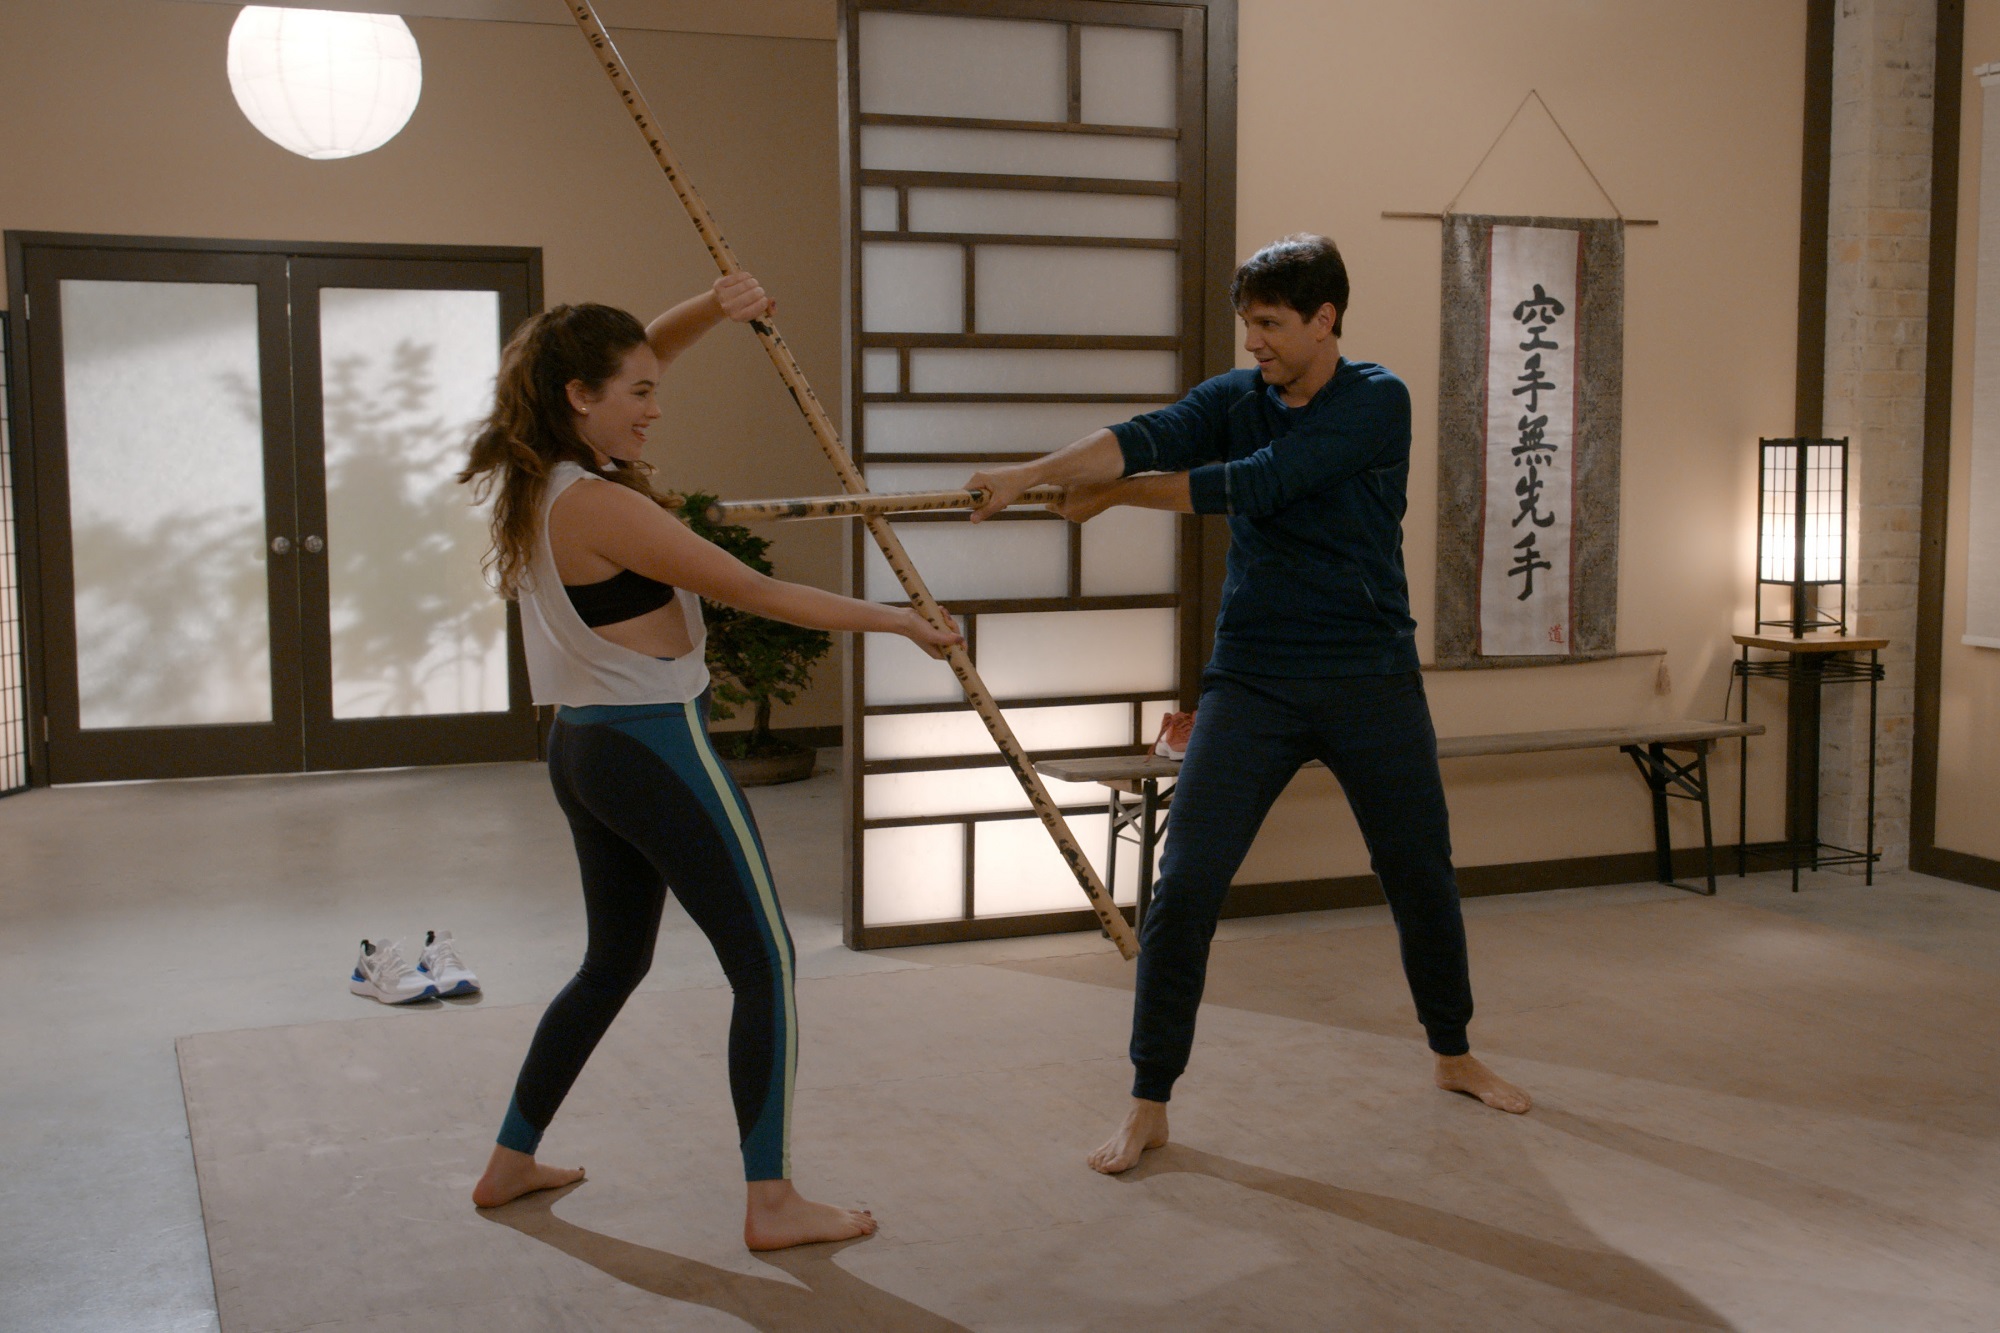 Ralph Macchio and Mary Mouser spar with staffs